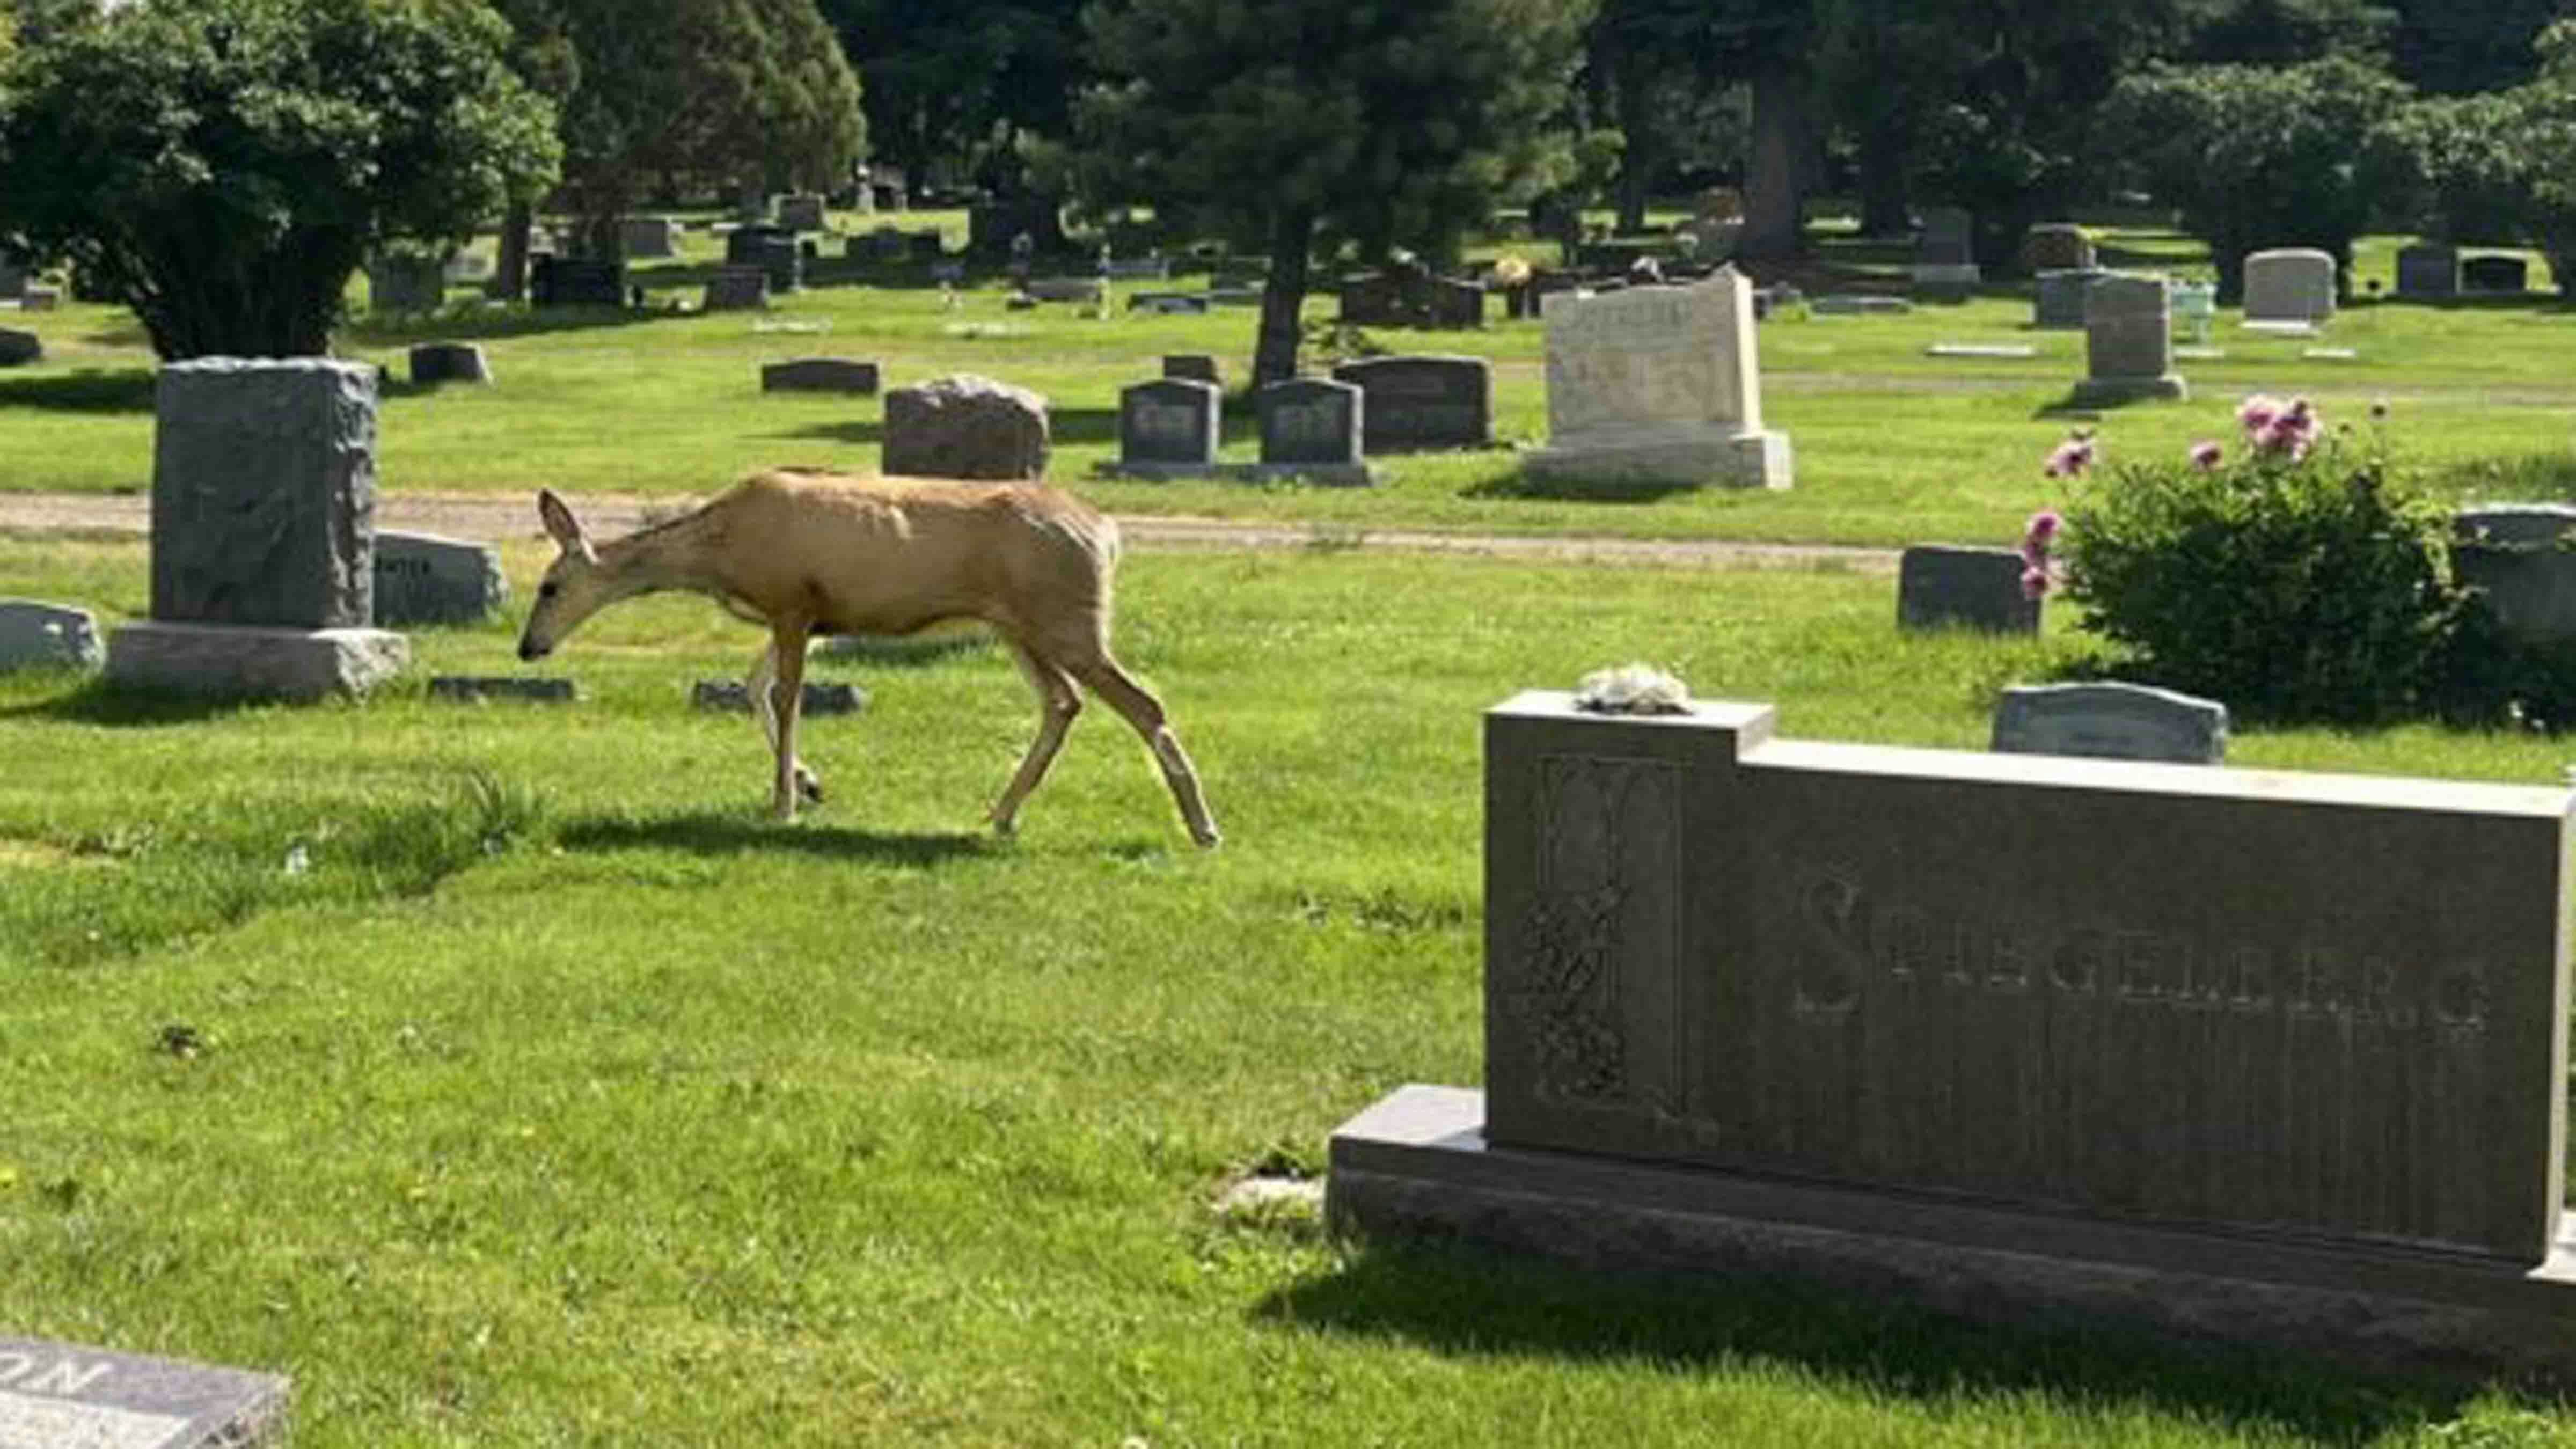 A doe mule deer keeps watch over her nearby fawn in Laramie’s Greenhill Cemetery on Thursday. The doe hasn’t been aggressive toward people, but cemetery staff are warning people to keep their dogs clear, because the doe hates them being near her fawn, and will go after dogs.